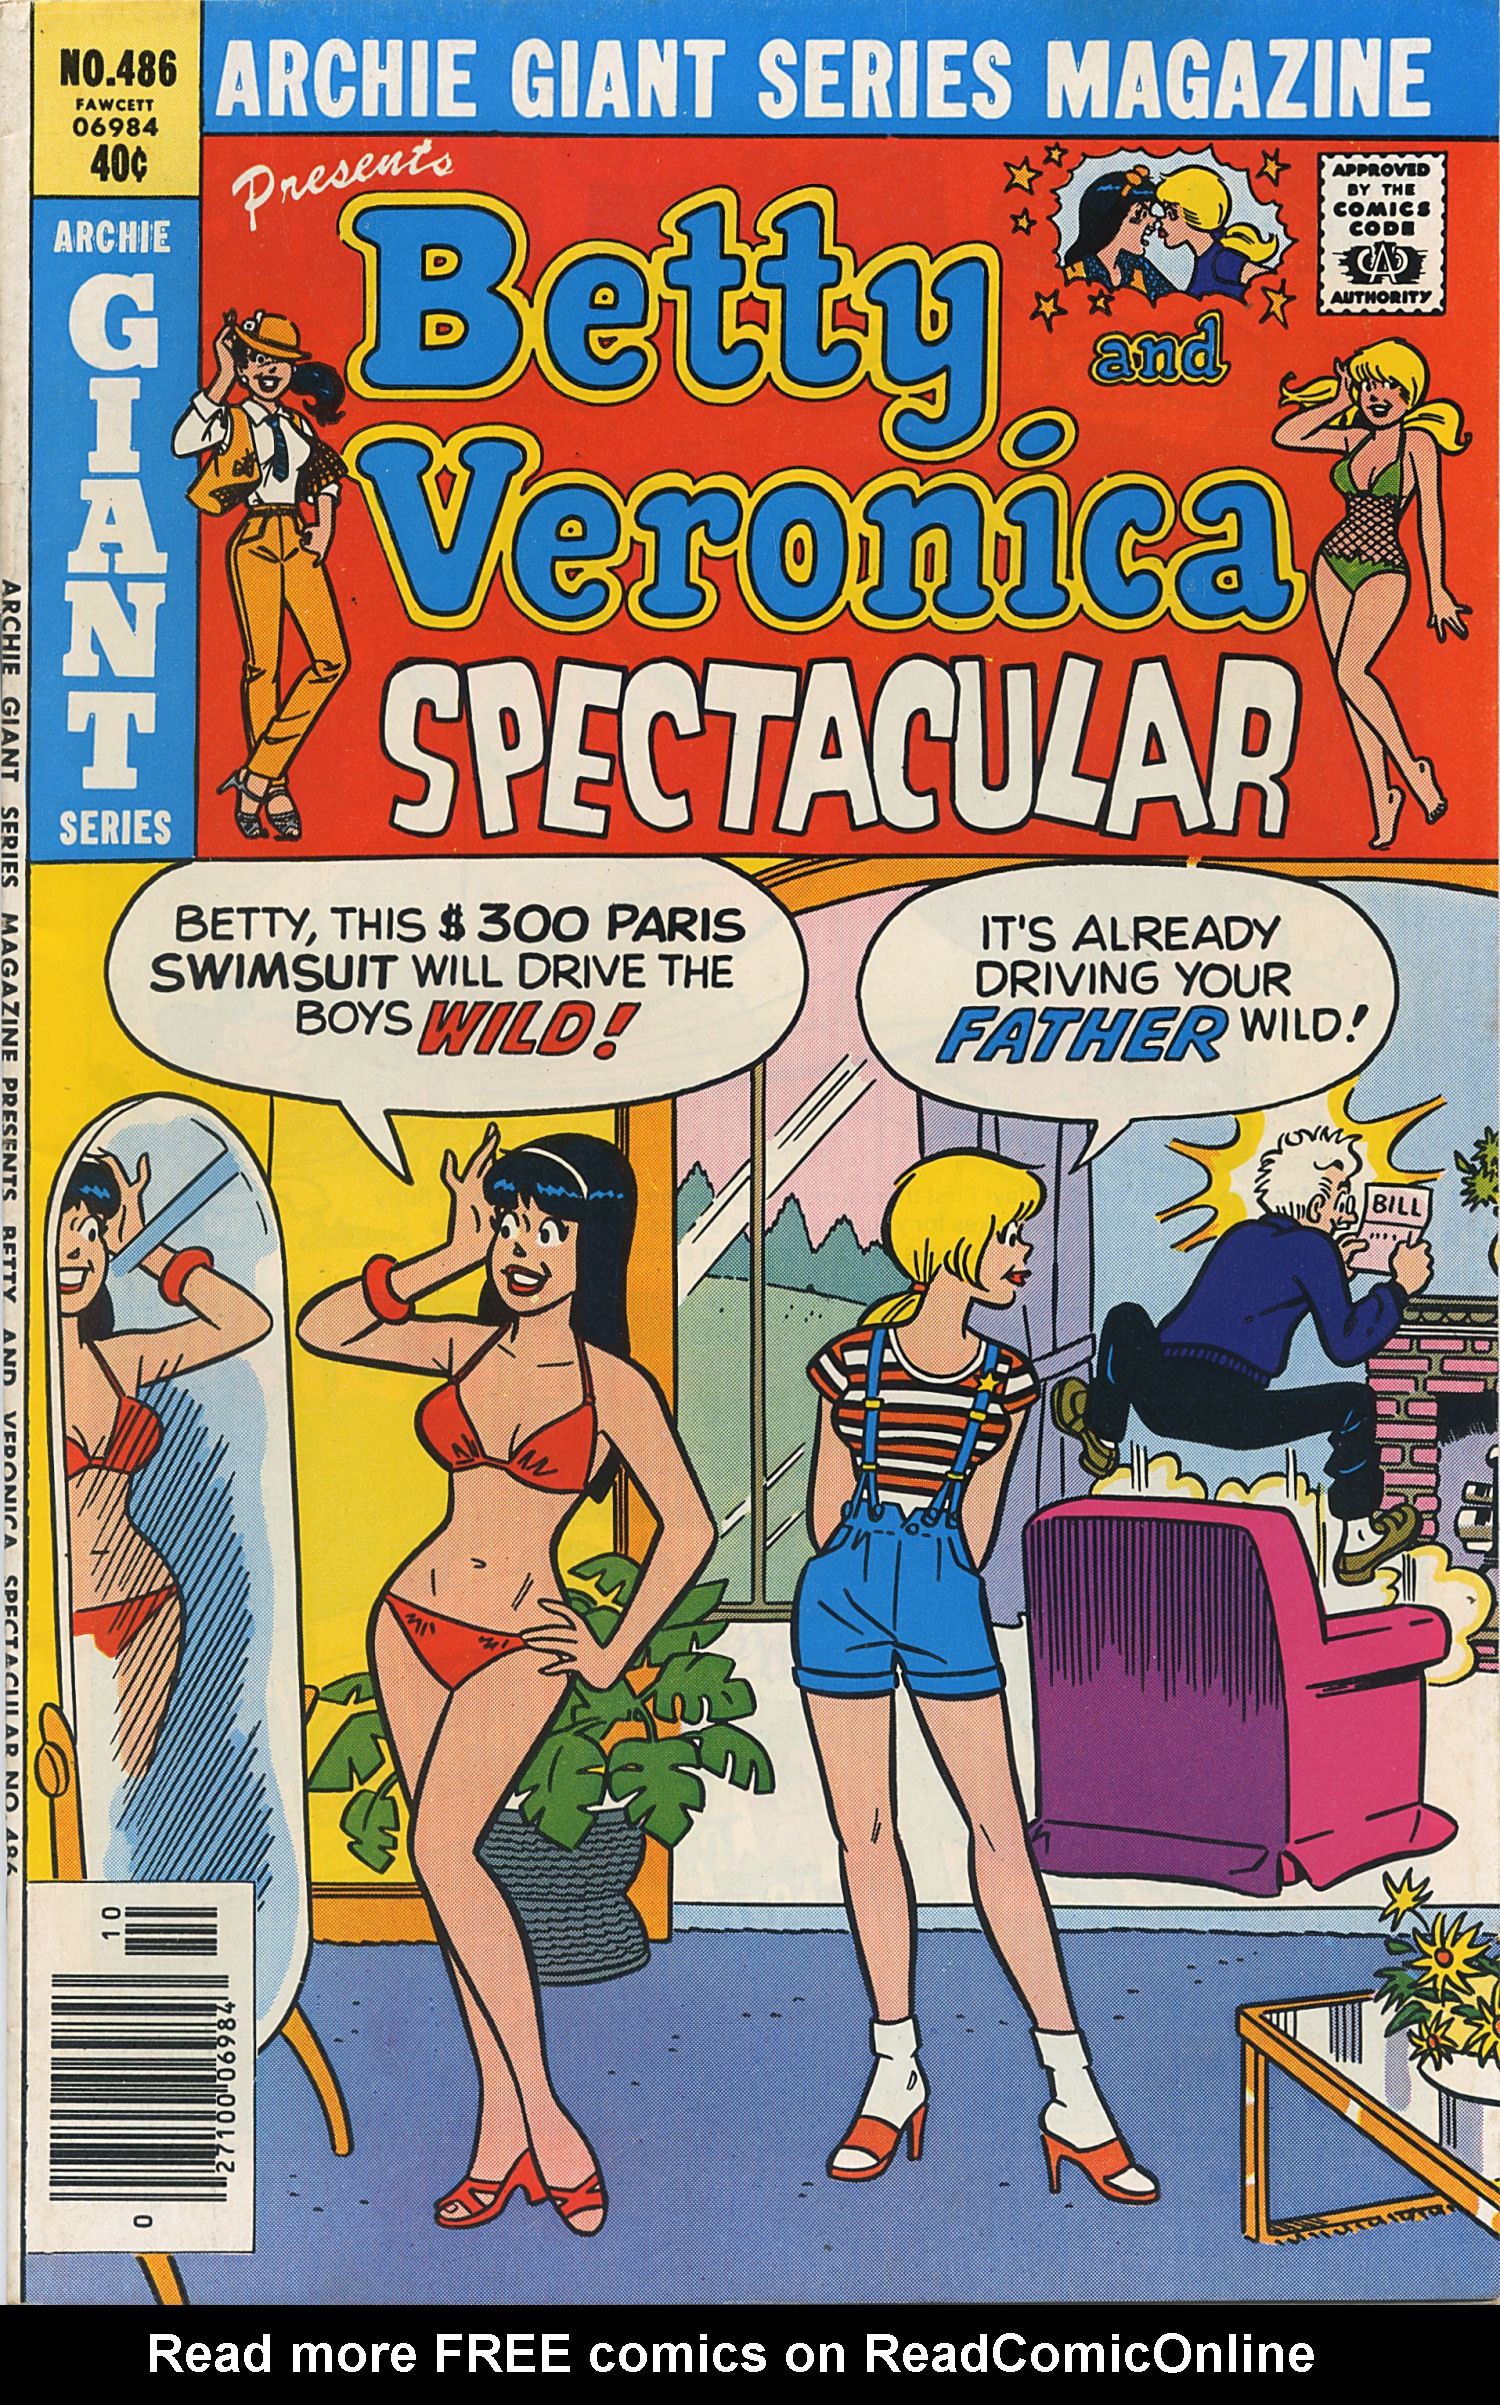 Read online Archie Giant Series Magazine comic -  Issue #486 - 1